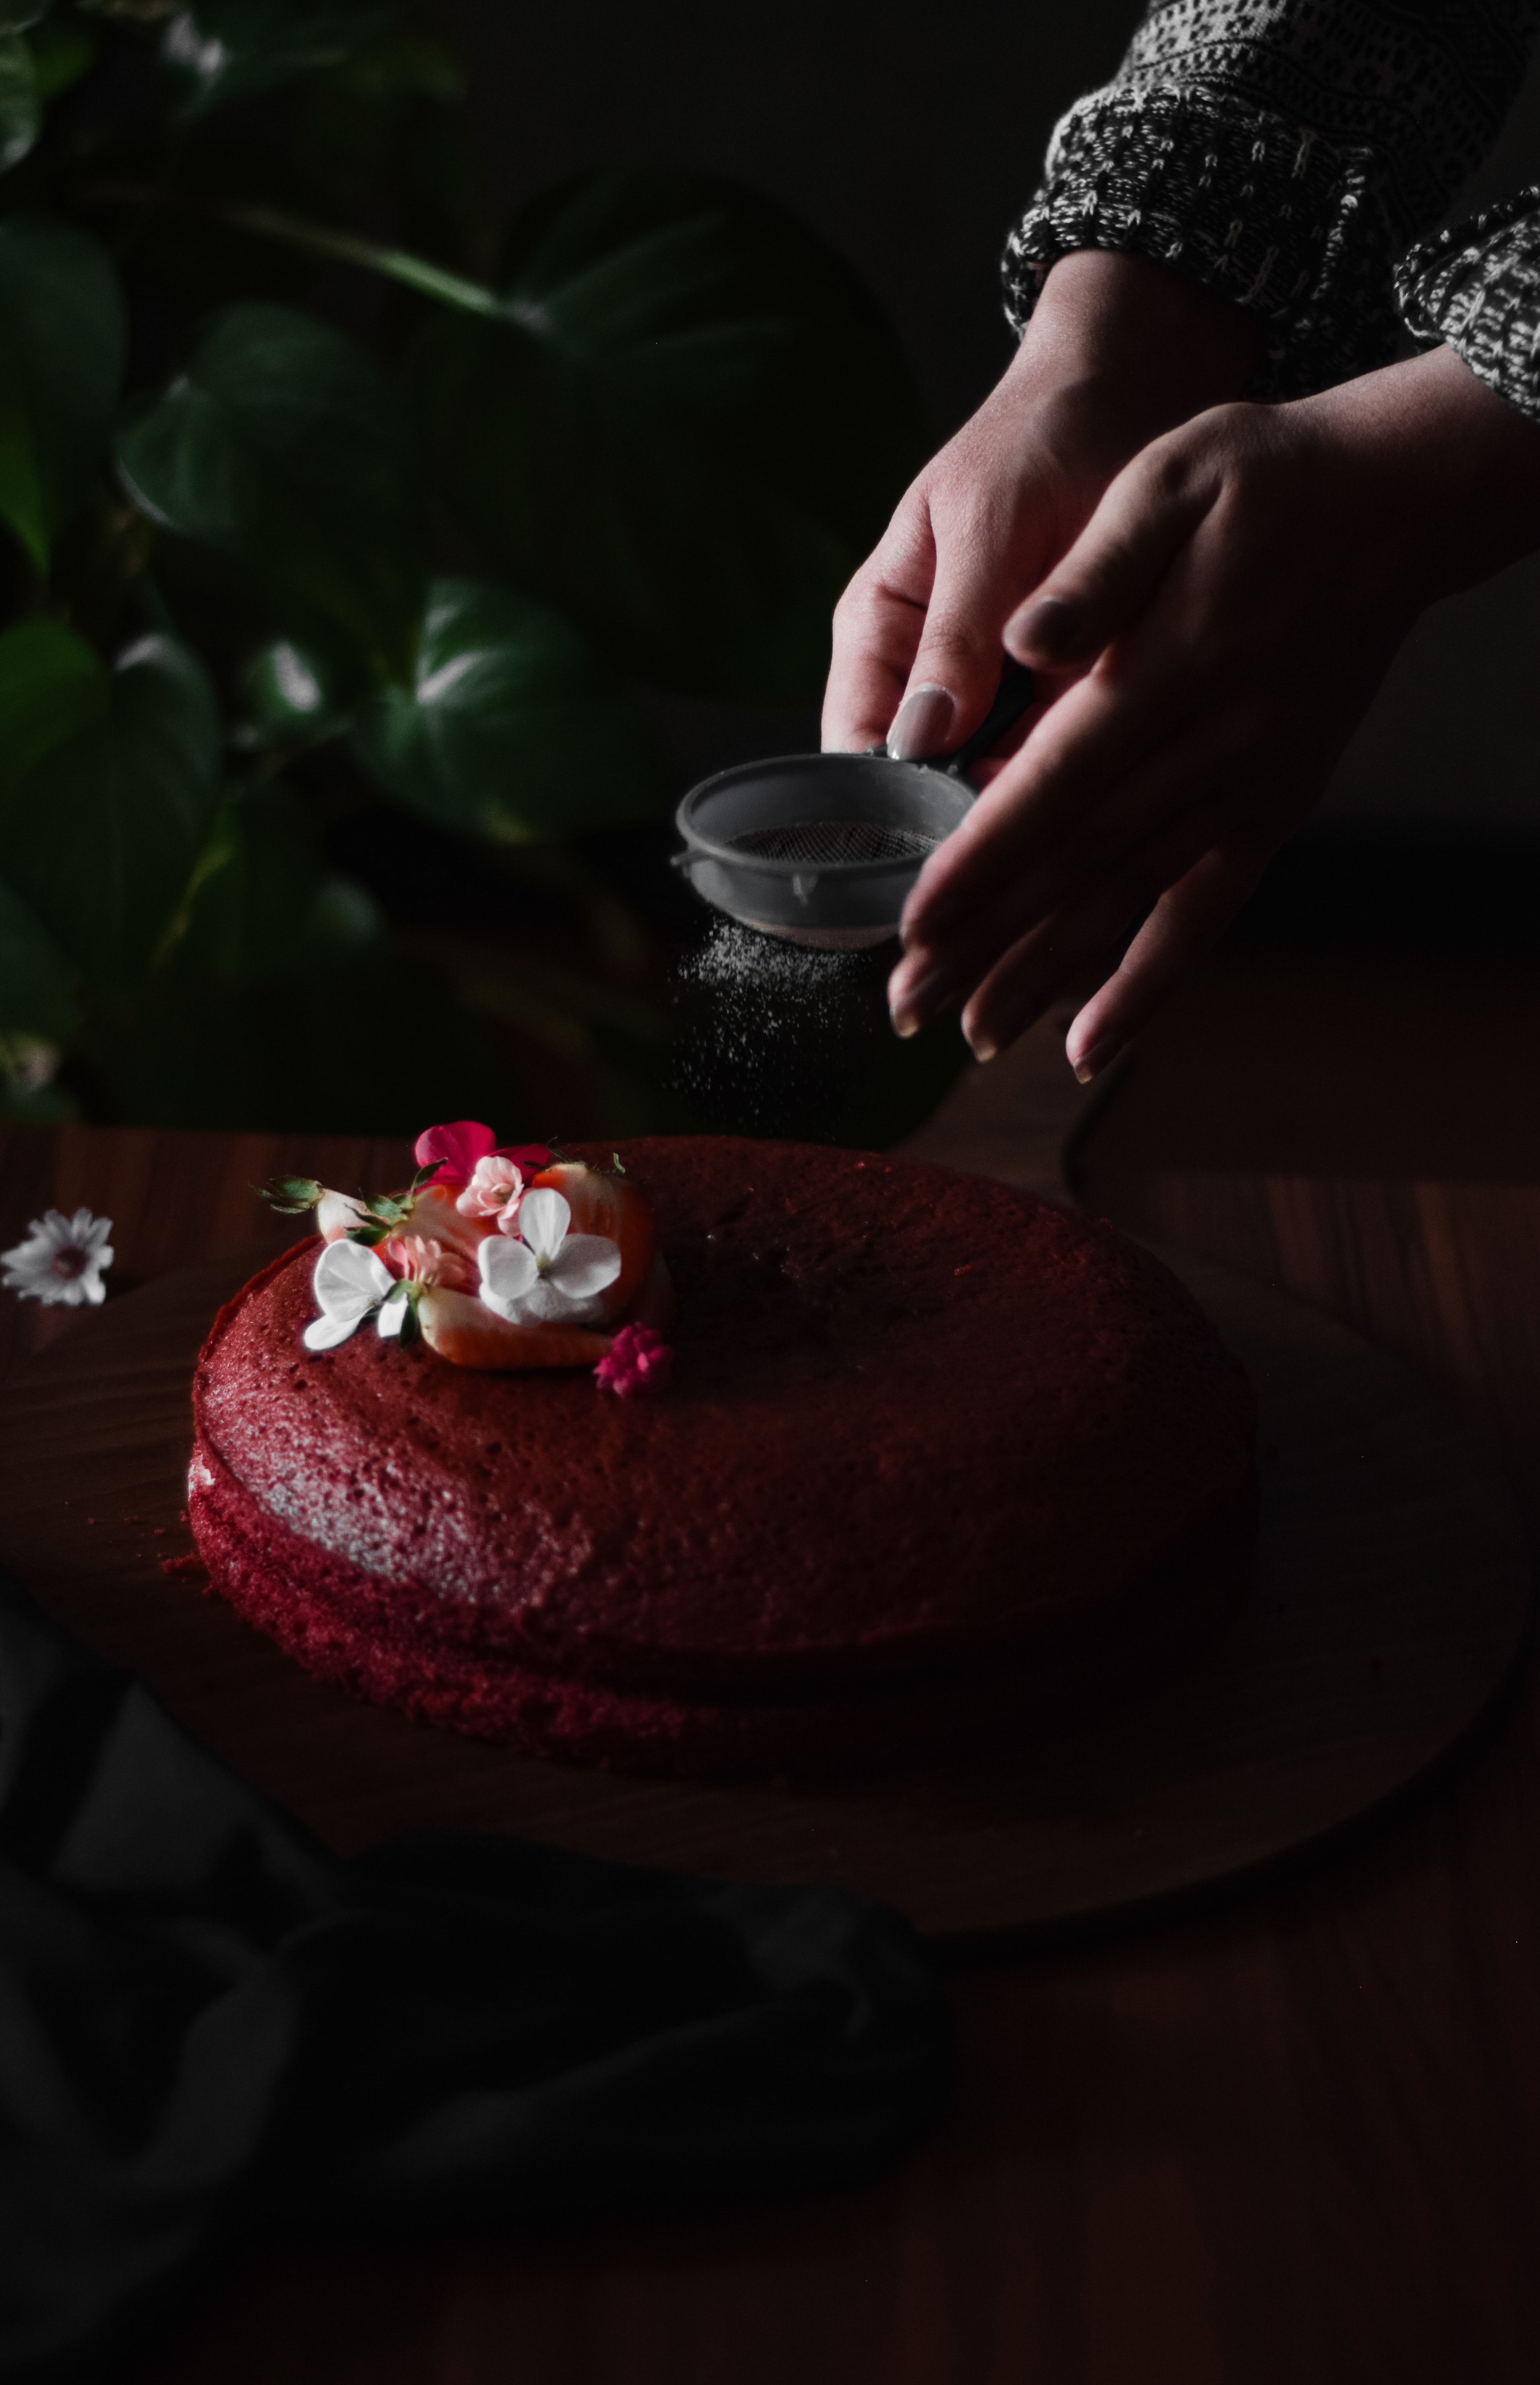 sprinkling, flowers, bakery products, baking download for free